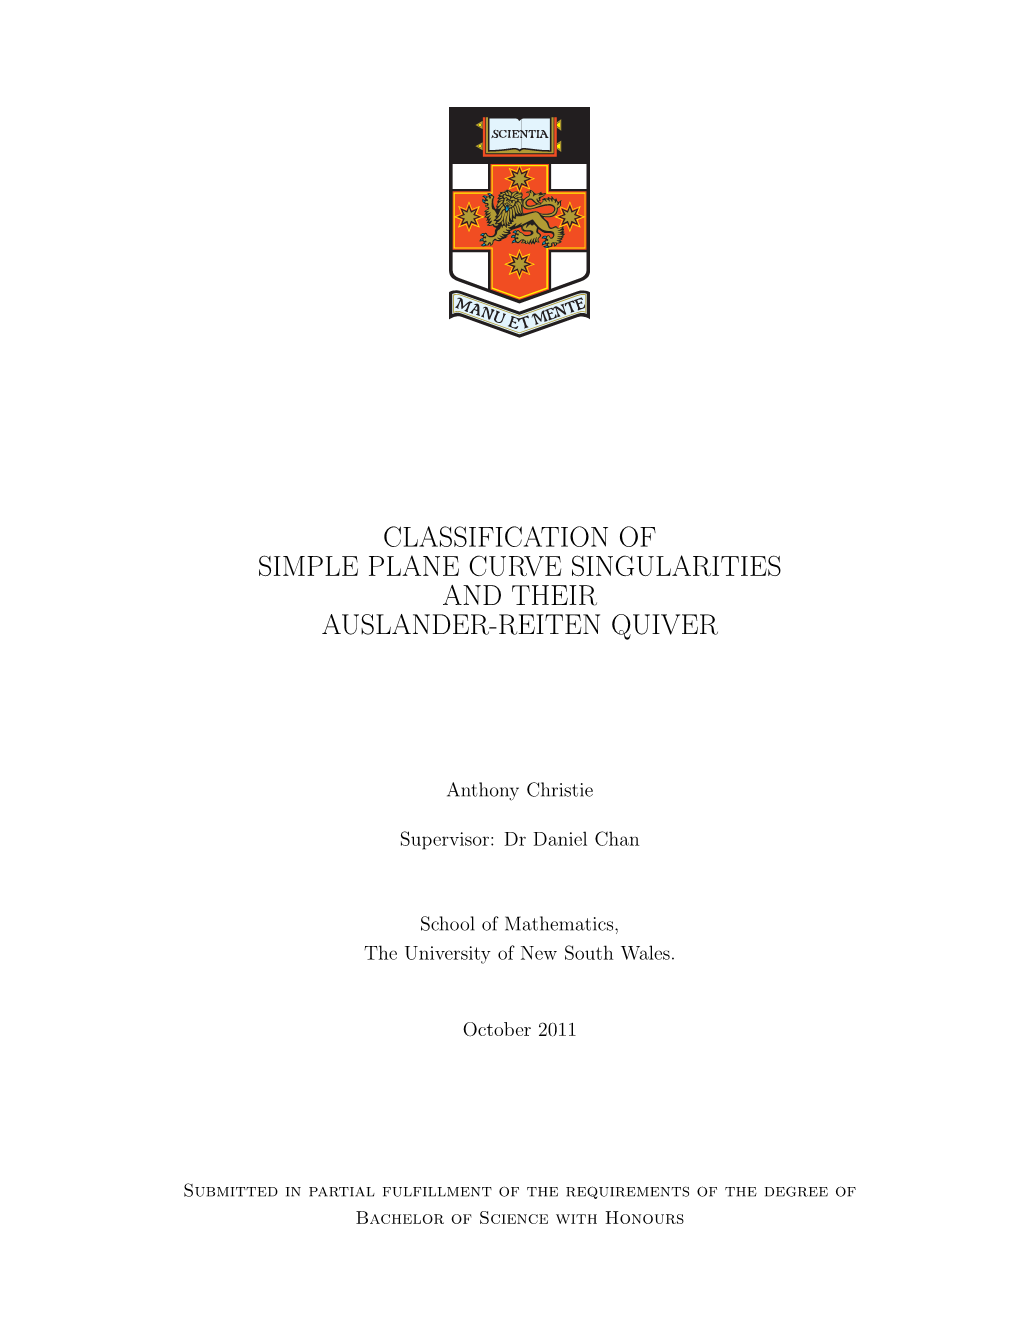 Classification of Simple Plane Curve Singularities and Their Auslander-Reiten Quiver